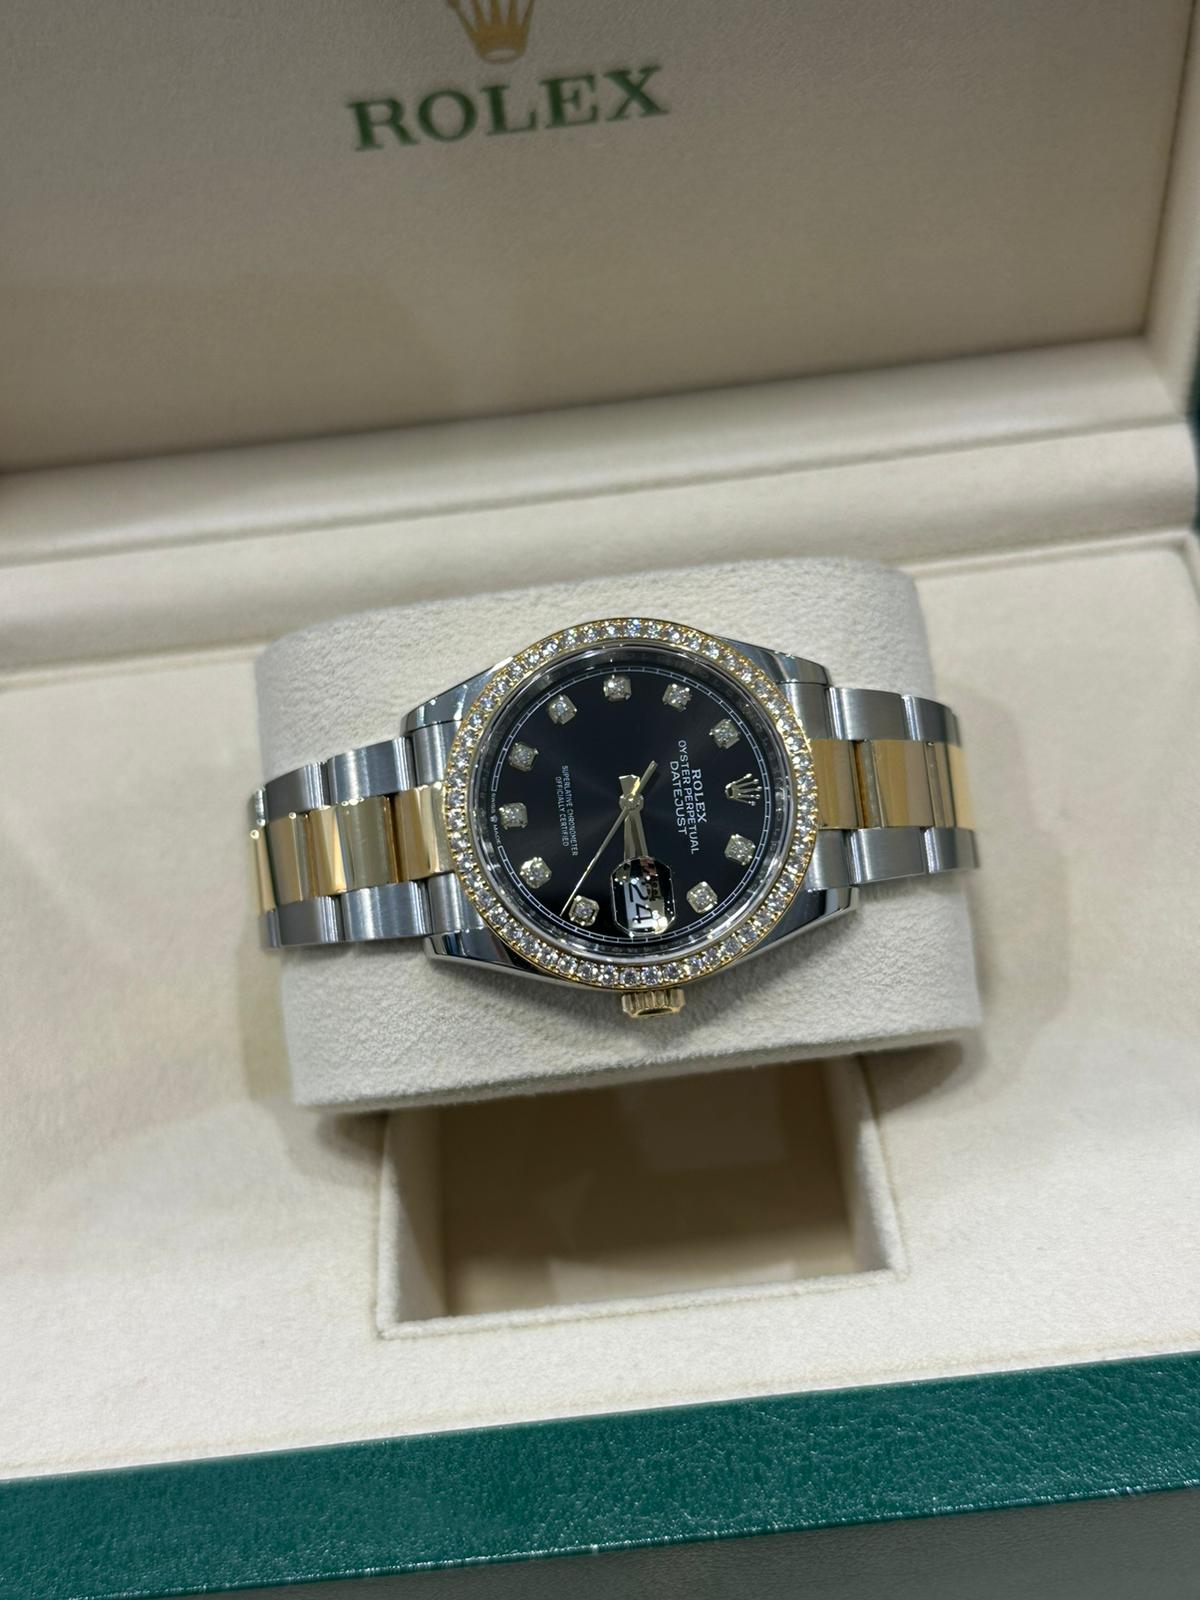 Rolex Datejust 36mm Steel&Yellow Gold with Factory diamond dial&bezel126283RBR 2019 with box/papers - Image 6 of 8